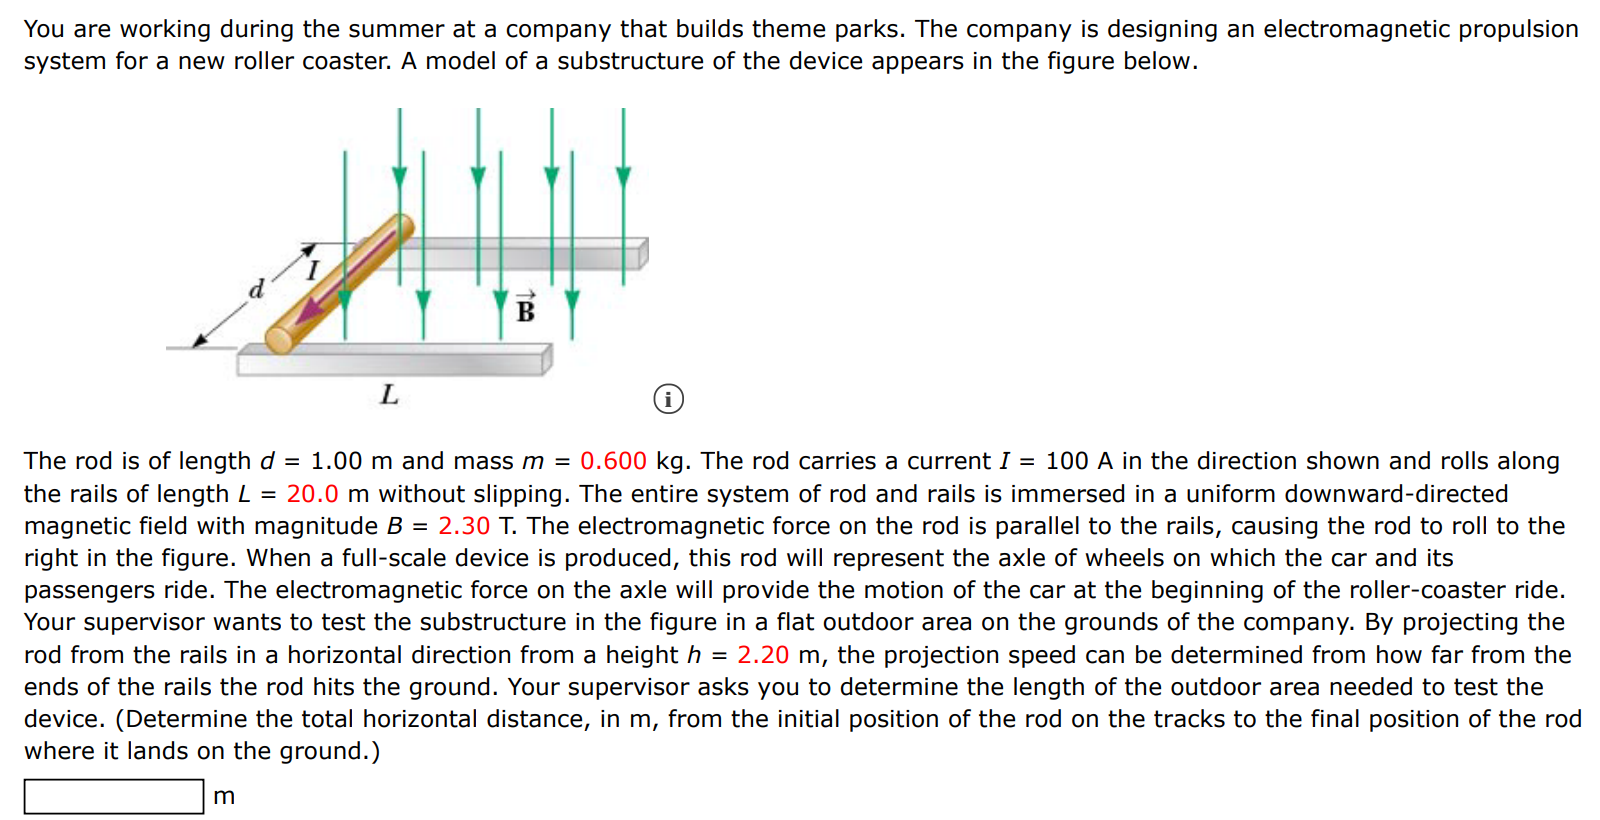 You are working during the summer at a company that builds theme parks. The company is designing an electromagnetic propulsion system for a new roller coaster. A model of a substructure of the device appears in the figure below. (i) The rod is of length d = 1.00 m and mass m = 0.600 kg. The rod carries a current I = 100 A in the direction shown and rolls along the rails of length L = 20.0 m without slipping. The entire system of rod and rails is immersed in a uniform downward-directed magnetic field with magnitude B = 2.30 T. The electromagnetic force on the rod is parallel to the rails, causing the rod to roll to the right in the figure. When a full-scale device is produced, this rod will represent the axle of wheels on which the car and its passengers ride. The electromagnetic force on the axle will provide the motion of the car at the beginning of the roller-coaster ride. Your supervisor wants to test the substructure in the figure in a flat outdoor area on the grounds of the company. By projecting the rod from the rails in a horizontal direction from a height h = 2.20 m, the projection speed can be determined from how far from the ends of the rails the rod hits the ground. Your supervisor asks you to determine the length of the outdoor area needed to test the device. (Determine the total horizontal distance, in m, from the initial position of the rod on the tracks to the final position of the rod where it lands on the ground.) m 